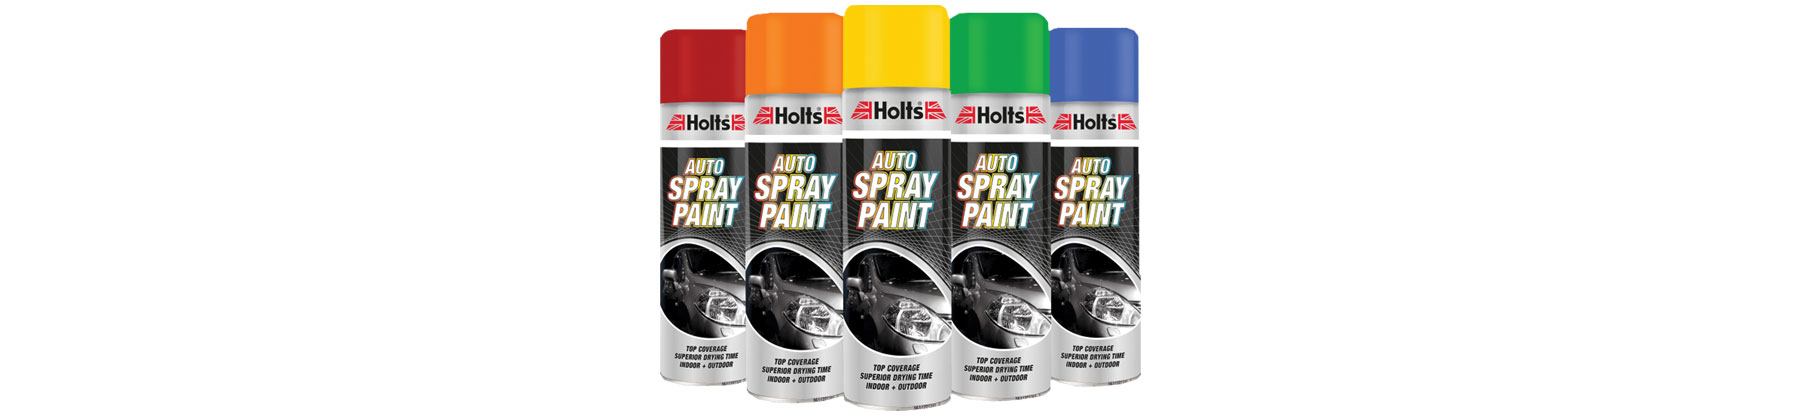 Holts Spray Paints